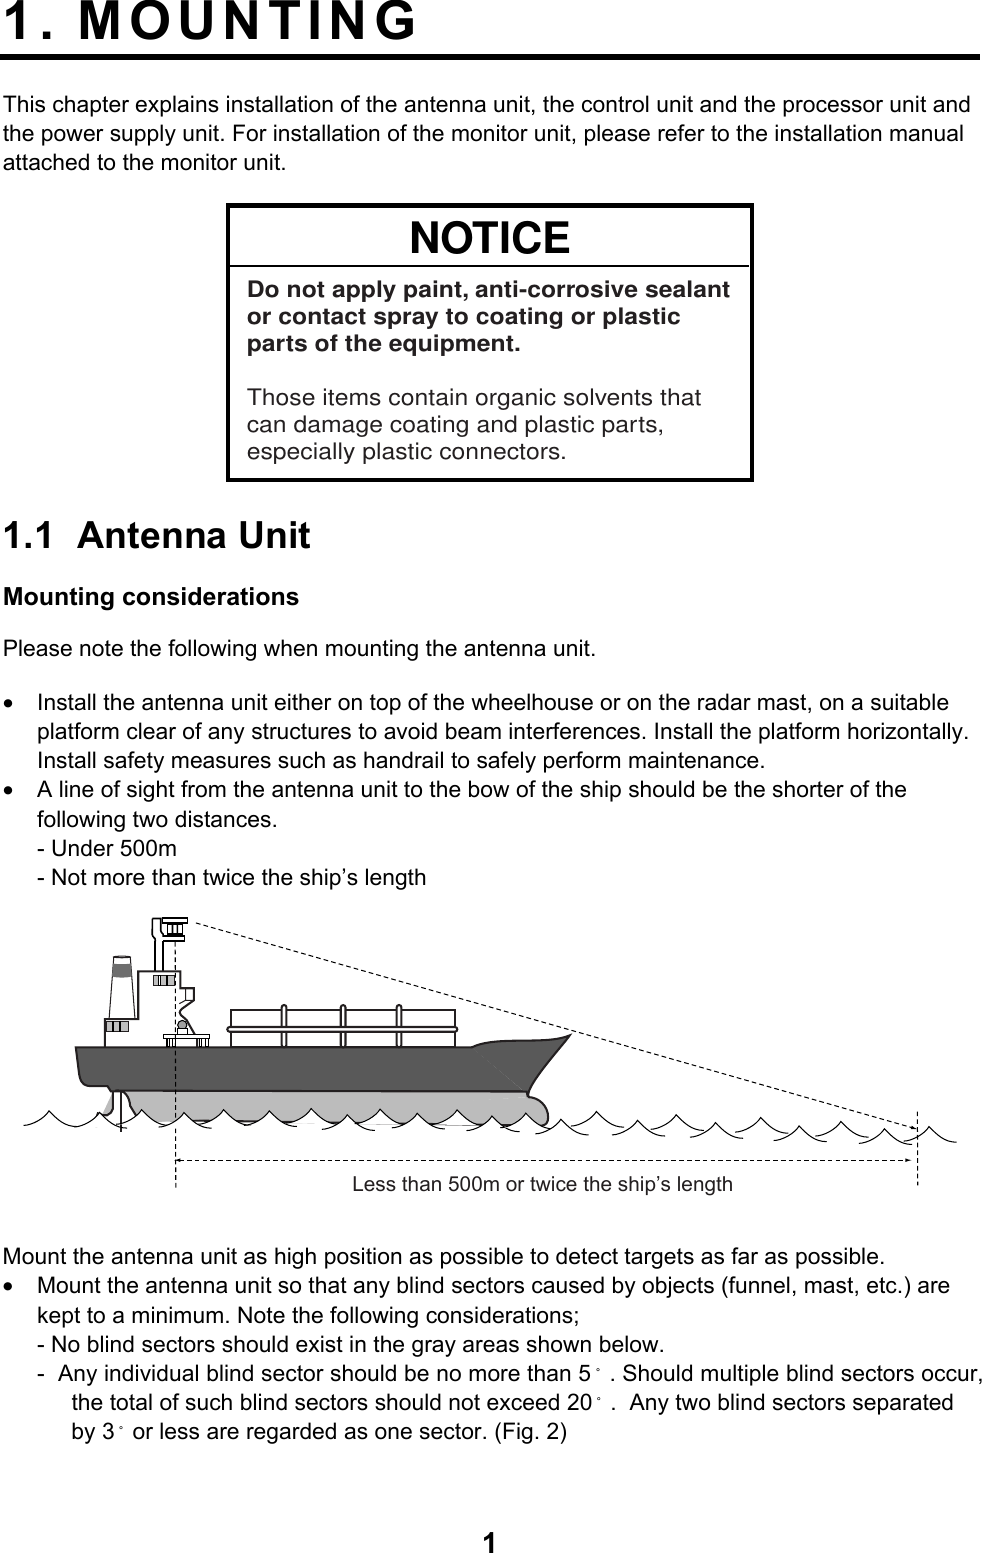  11. MOUNTING  This chapter explains installation of the antenna unit, the control unit and the processor unit and the power supply unit. For installation of the monitor unit, please refer to the installation manual attached to the monitor unit. NOTICEDo not apply paint, anti-corrosive sealantor contact spray to coating or plastic parts of the equipment. Those items contain organic solvents that can damage coating and plastic parts, especially plastic connectors. 1.1 Antenna Unit Mounting considerations Please note the following when mounting the antenna unit. •  Install the antenna unit either on top of the wheelhouse or on the radar mast, on a suitable platform clear of any structures to avoid beam interferences. Install the platform horizontally. Install safety measures such as handrail to safely perform maintenance. •  A line of sight from the antenna unit to the bow of the ship should be the shorter of the following two distances. - Under 500m - Not more than twice the ship’s length Less than 500m or twice the ship’s length Mount the antenna unit as high position as possible to detect targets as far as possible. •  Mount the antenna unit so that any blind sectors caused by objects (funnel, mast, etc.) are kept to a minimum. Note the following considerations; - No blind sectors should exist in the gray areas shown below. -  Any individual blind sector should be no more than 5 ̊. Should multiple blind sectors occur, the total of such blind sectors should not exceed 20 ̊.  Any two blind sectors separated by 3 ̊or less are regarded as one sector. (Fig. 2) 